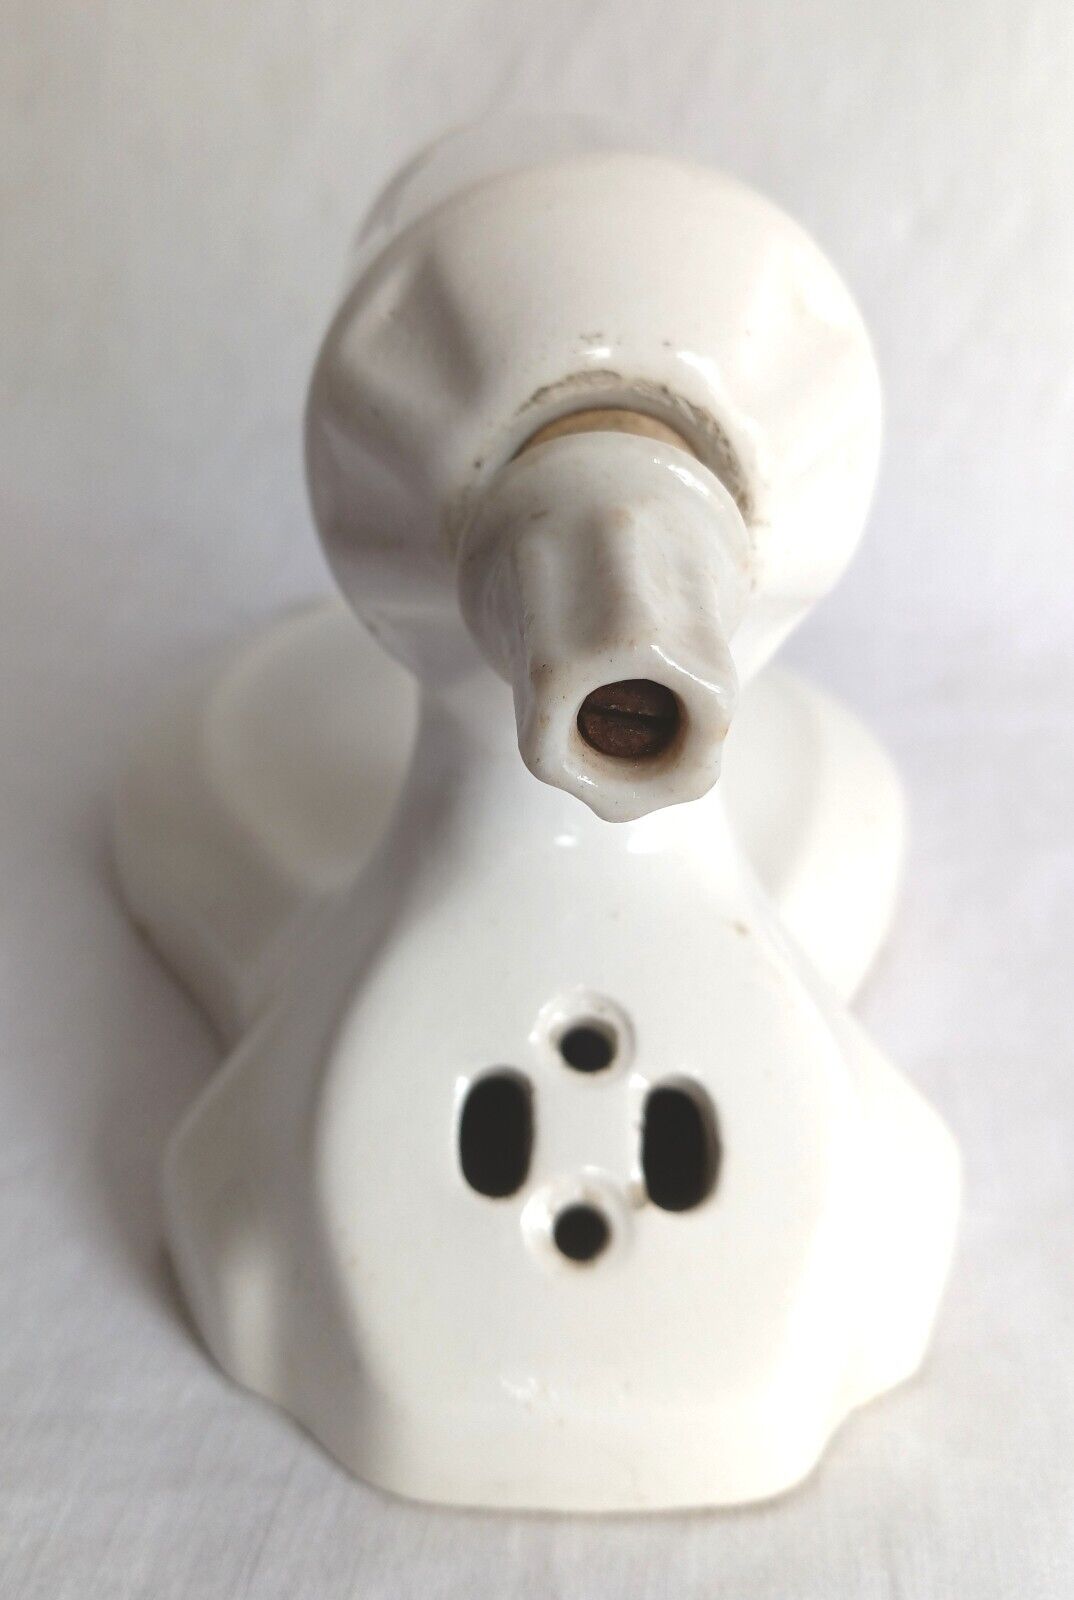 Antique Old Reclaimed Salvaged Ceramic Bathroom Wall Mount Sconce Collectible Retro Lighting - Germany